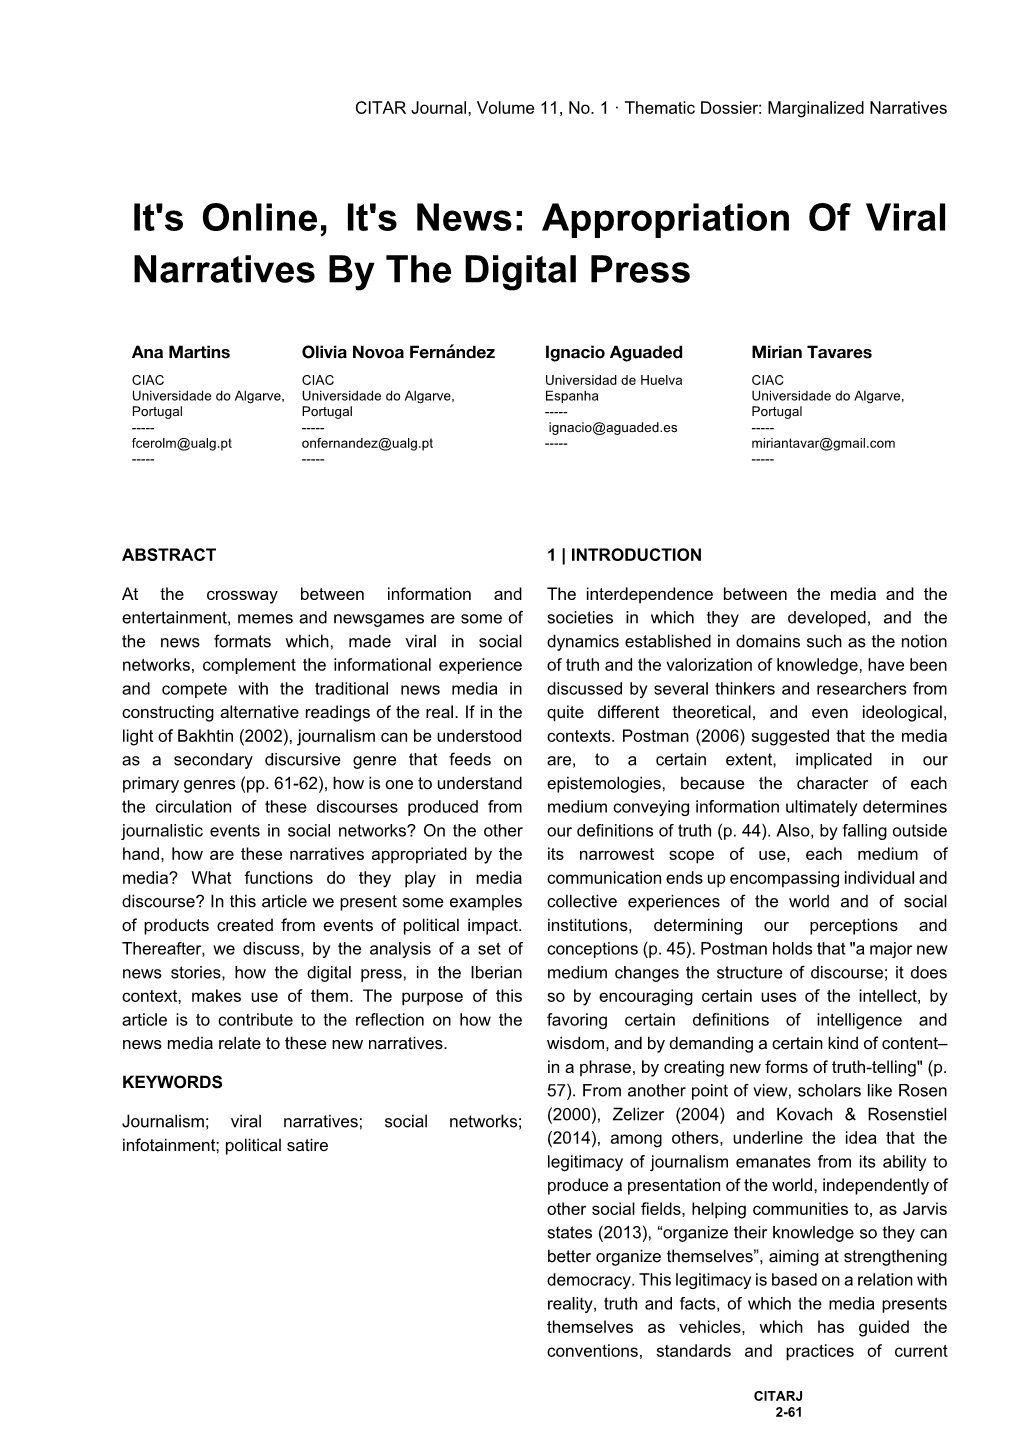 Appropriation of Viral Narratives by the Digital Press